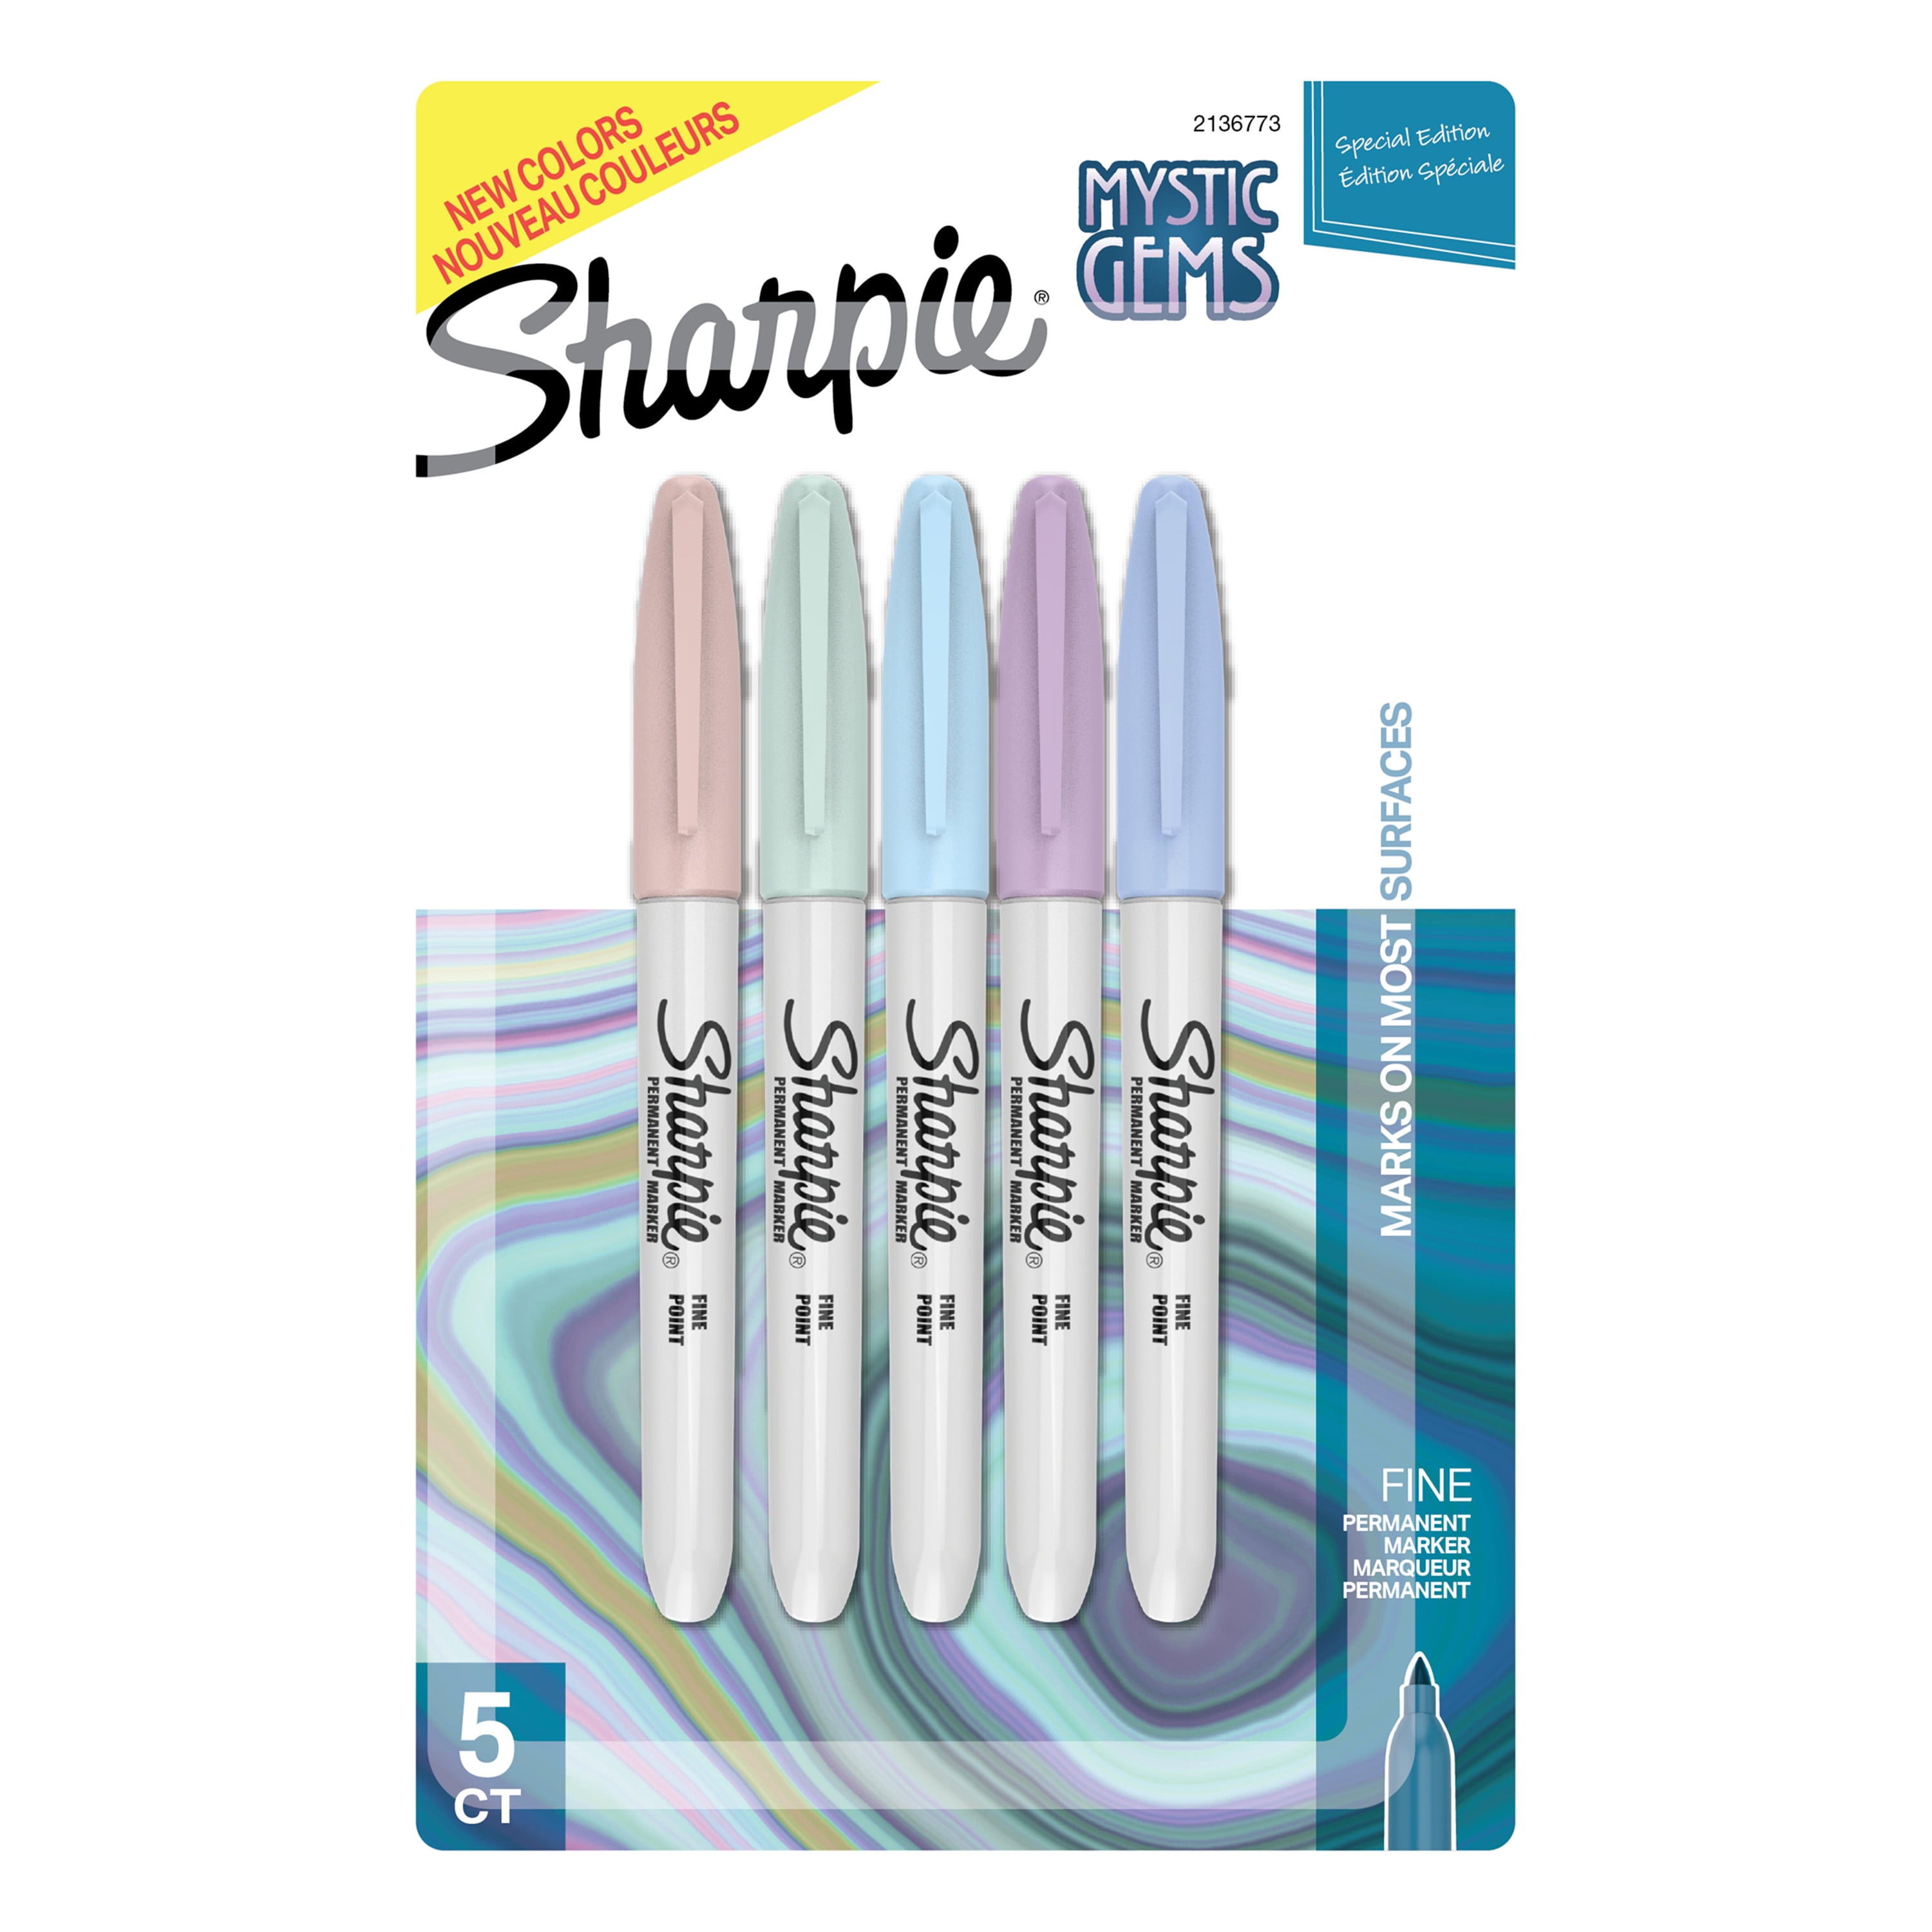 Sharpie Mystic Gems Ultra Fine Point Permanent Marker Special Edition, 5  count